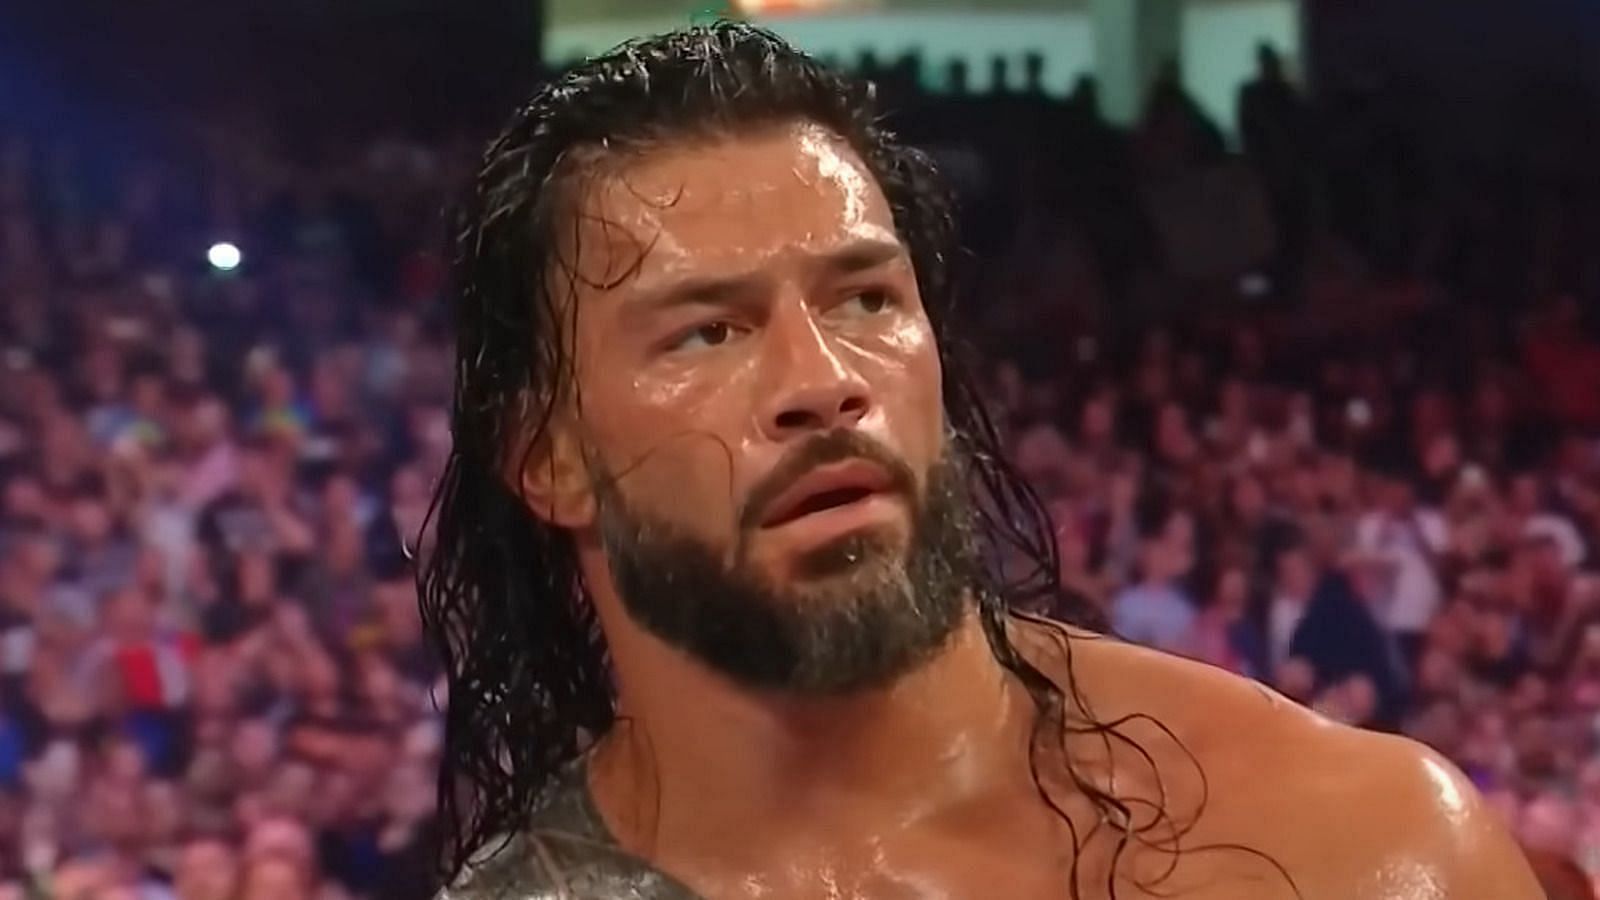 Roman Reigns could be in for a shocker